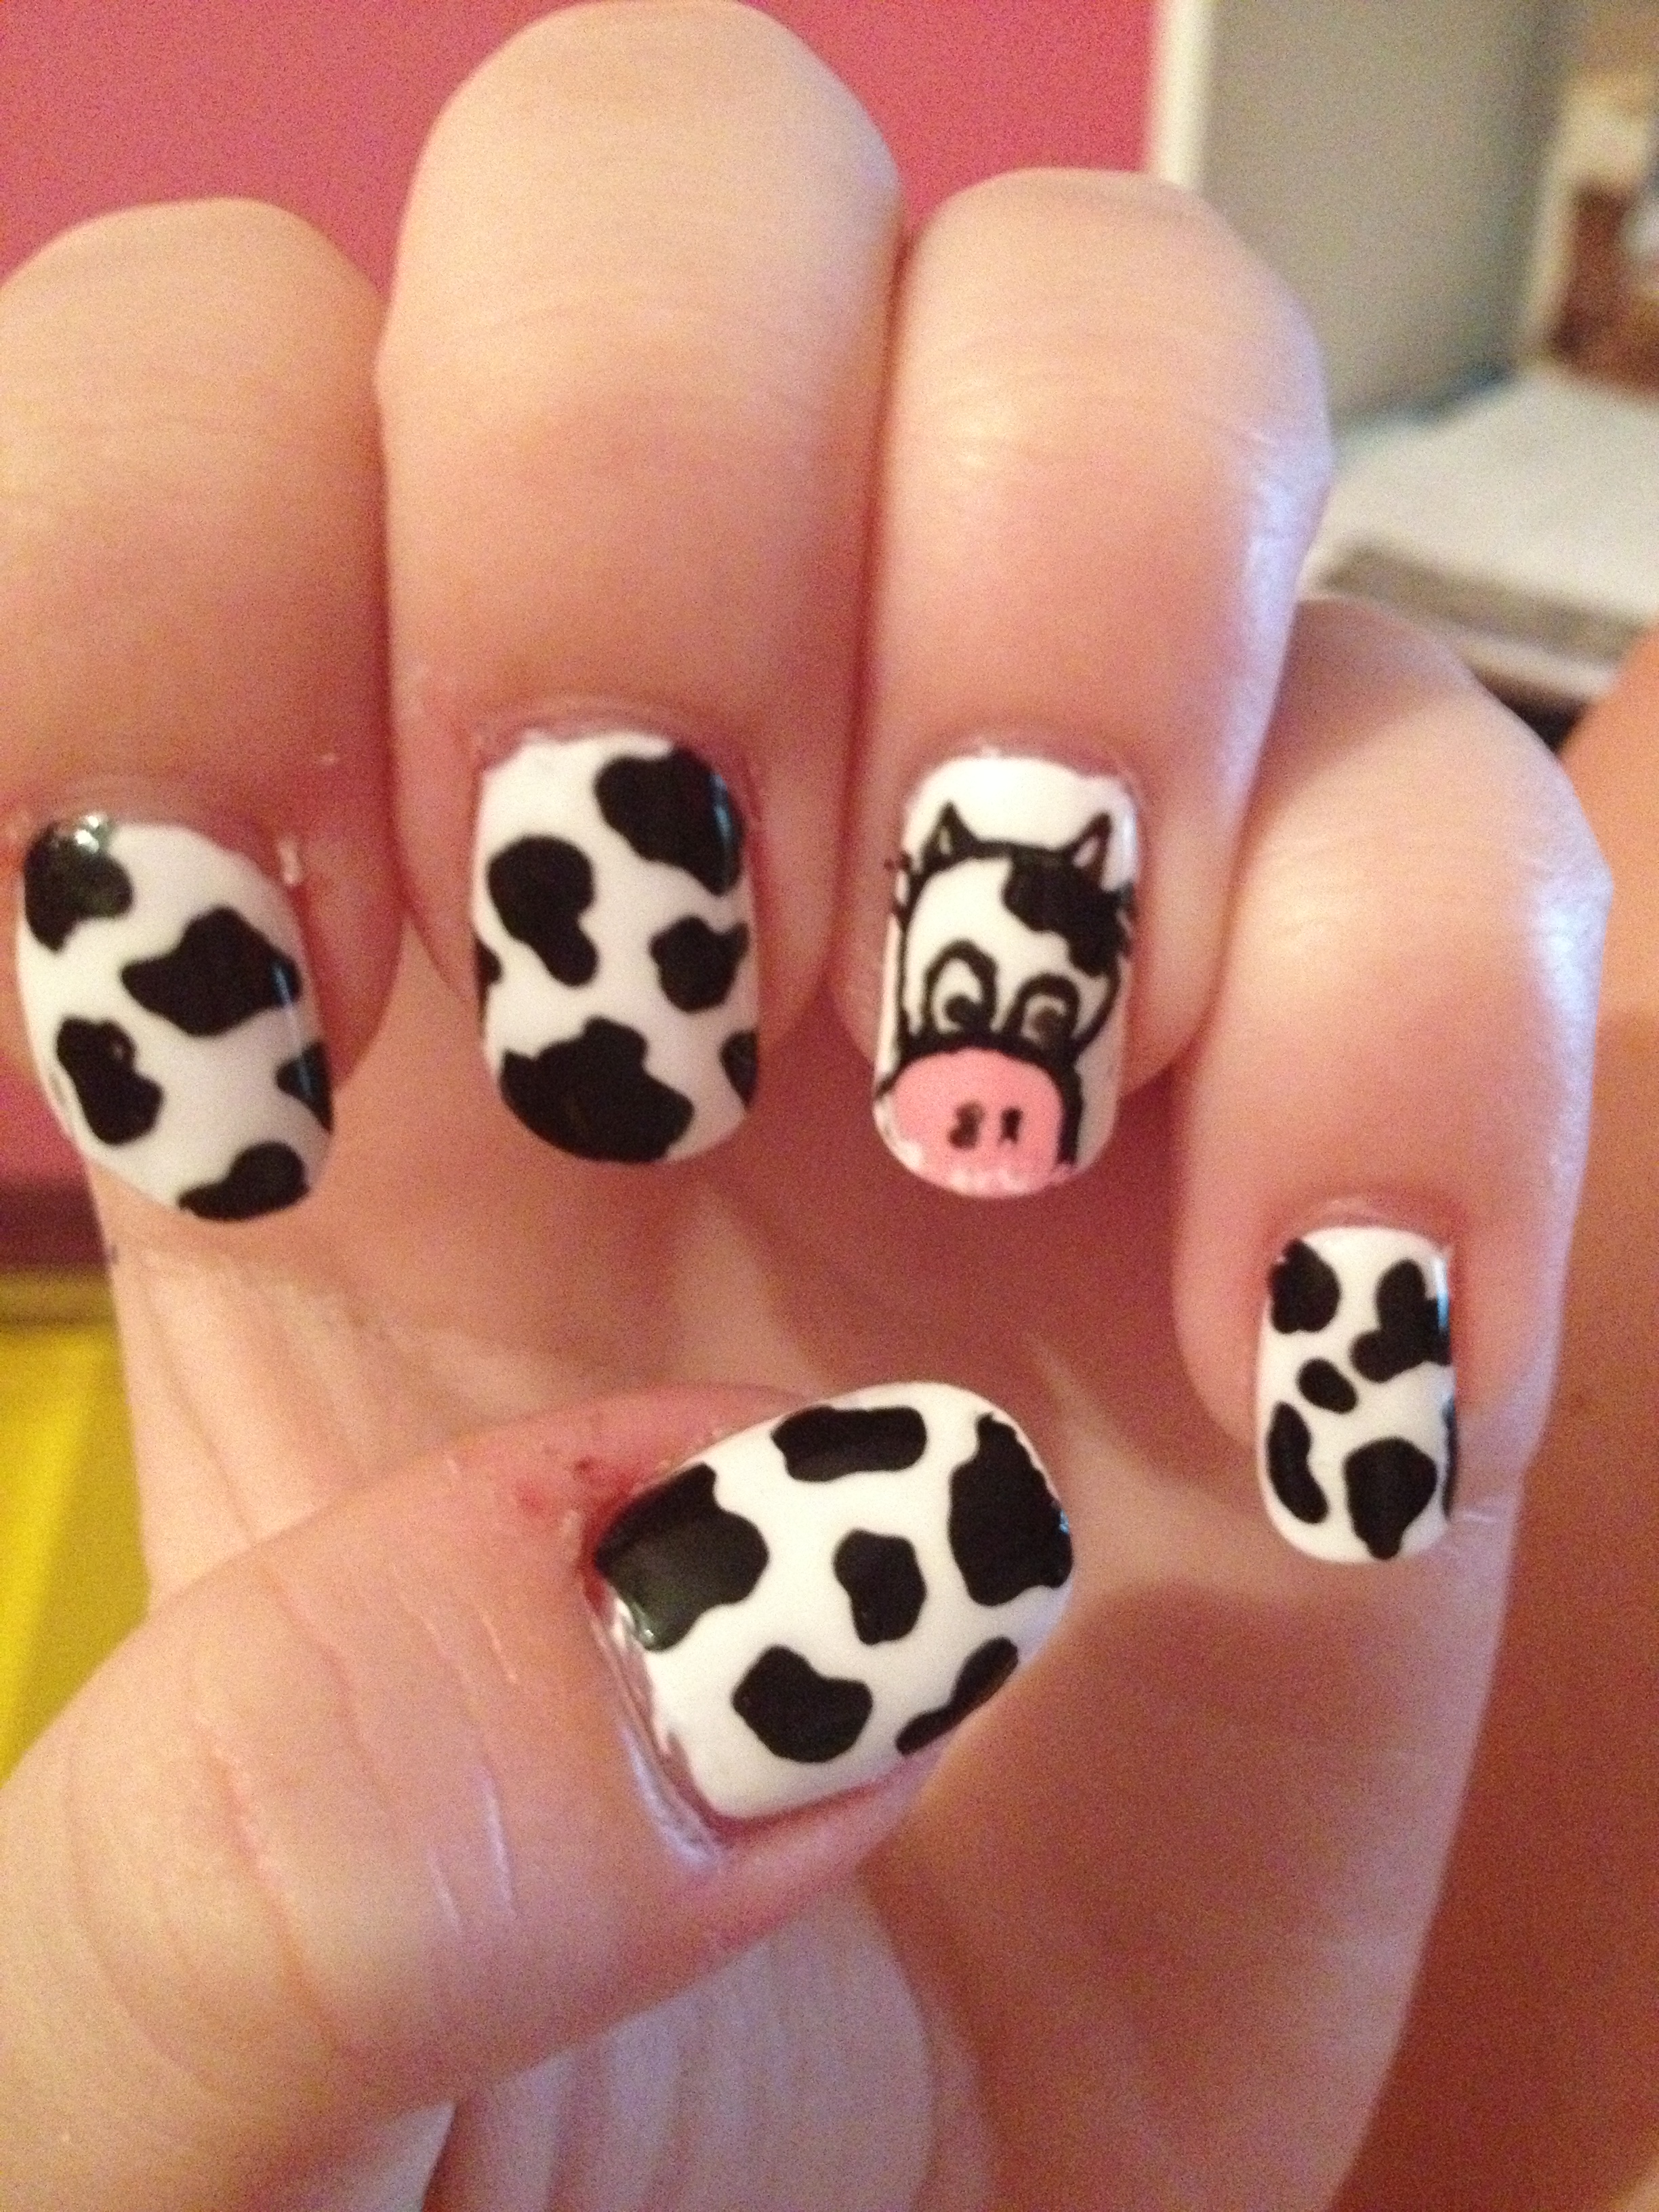 Cow themed nails by jaide-holly on DeviantArt